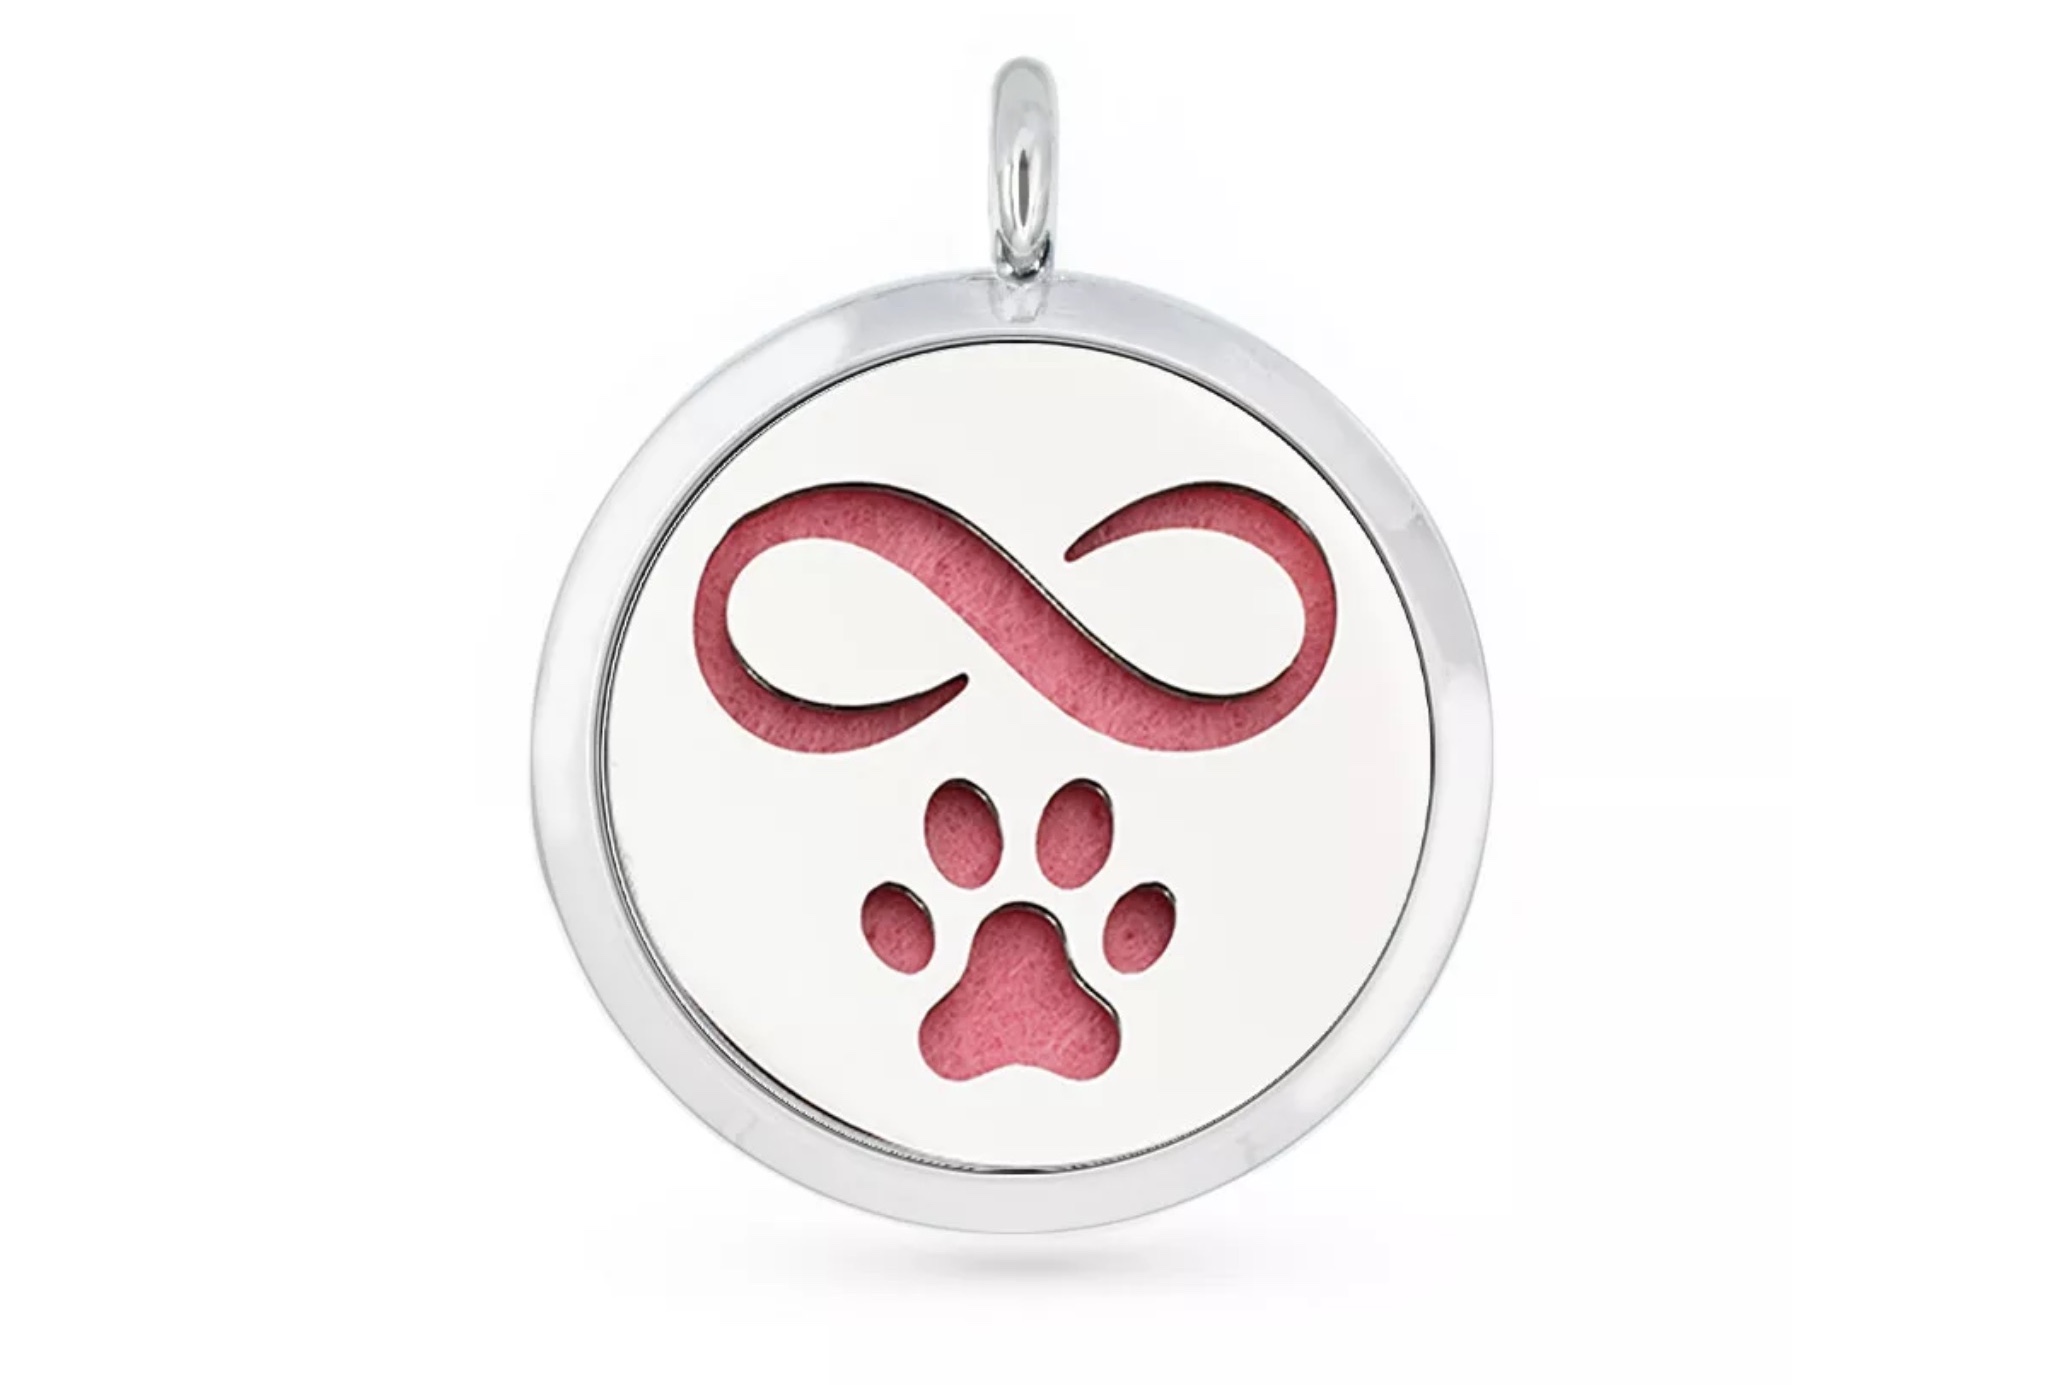 Aromatherapy Diffuser pendant - Infinity and Paw 30mm